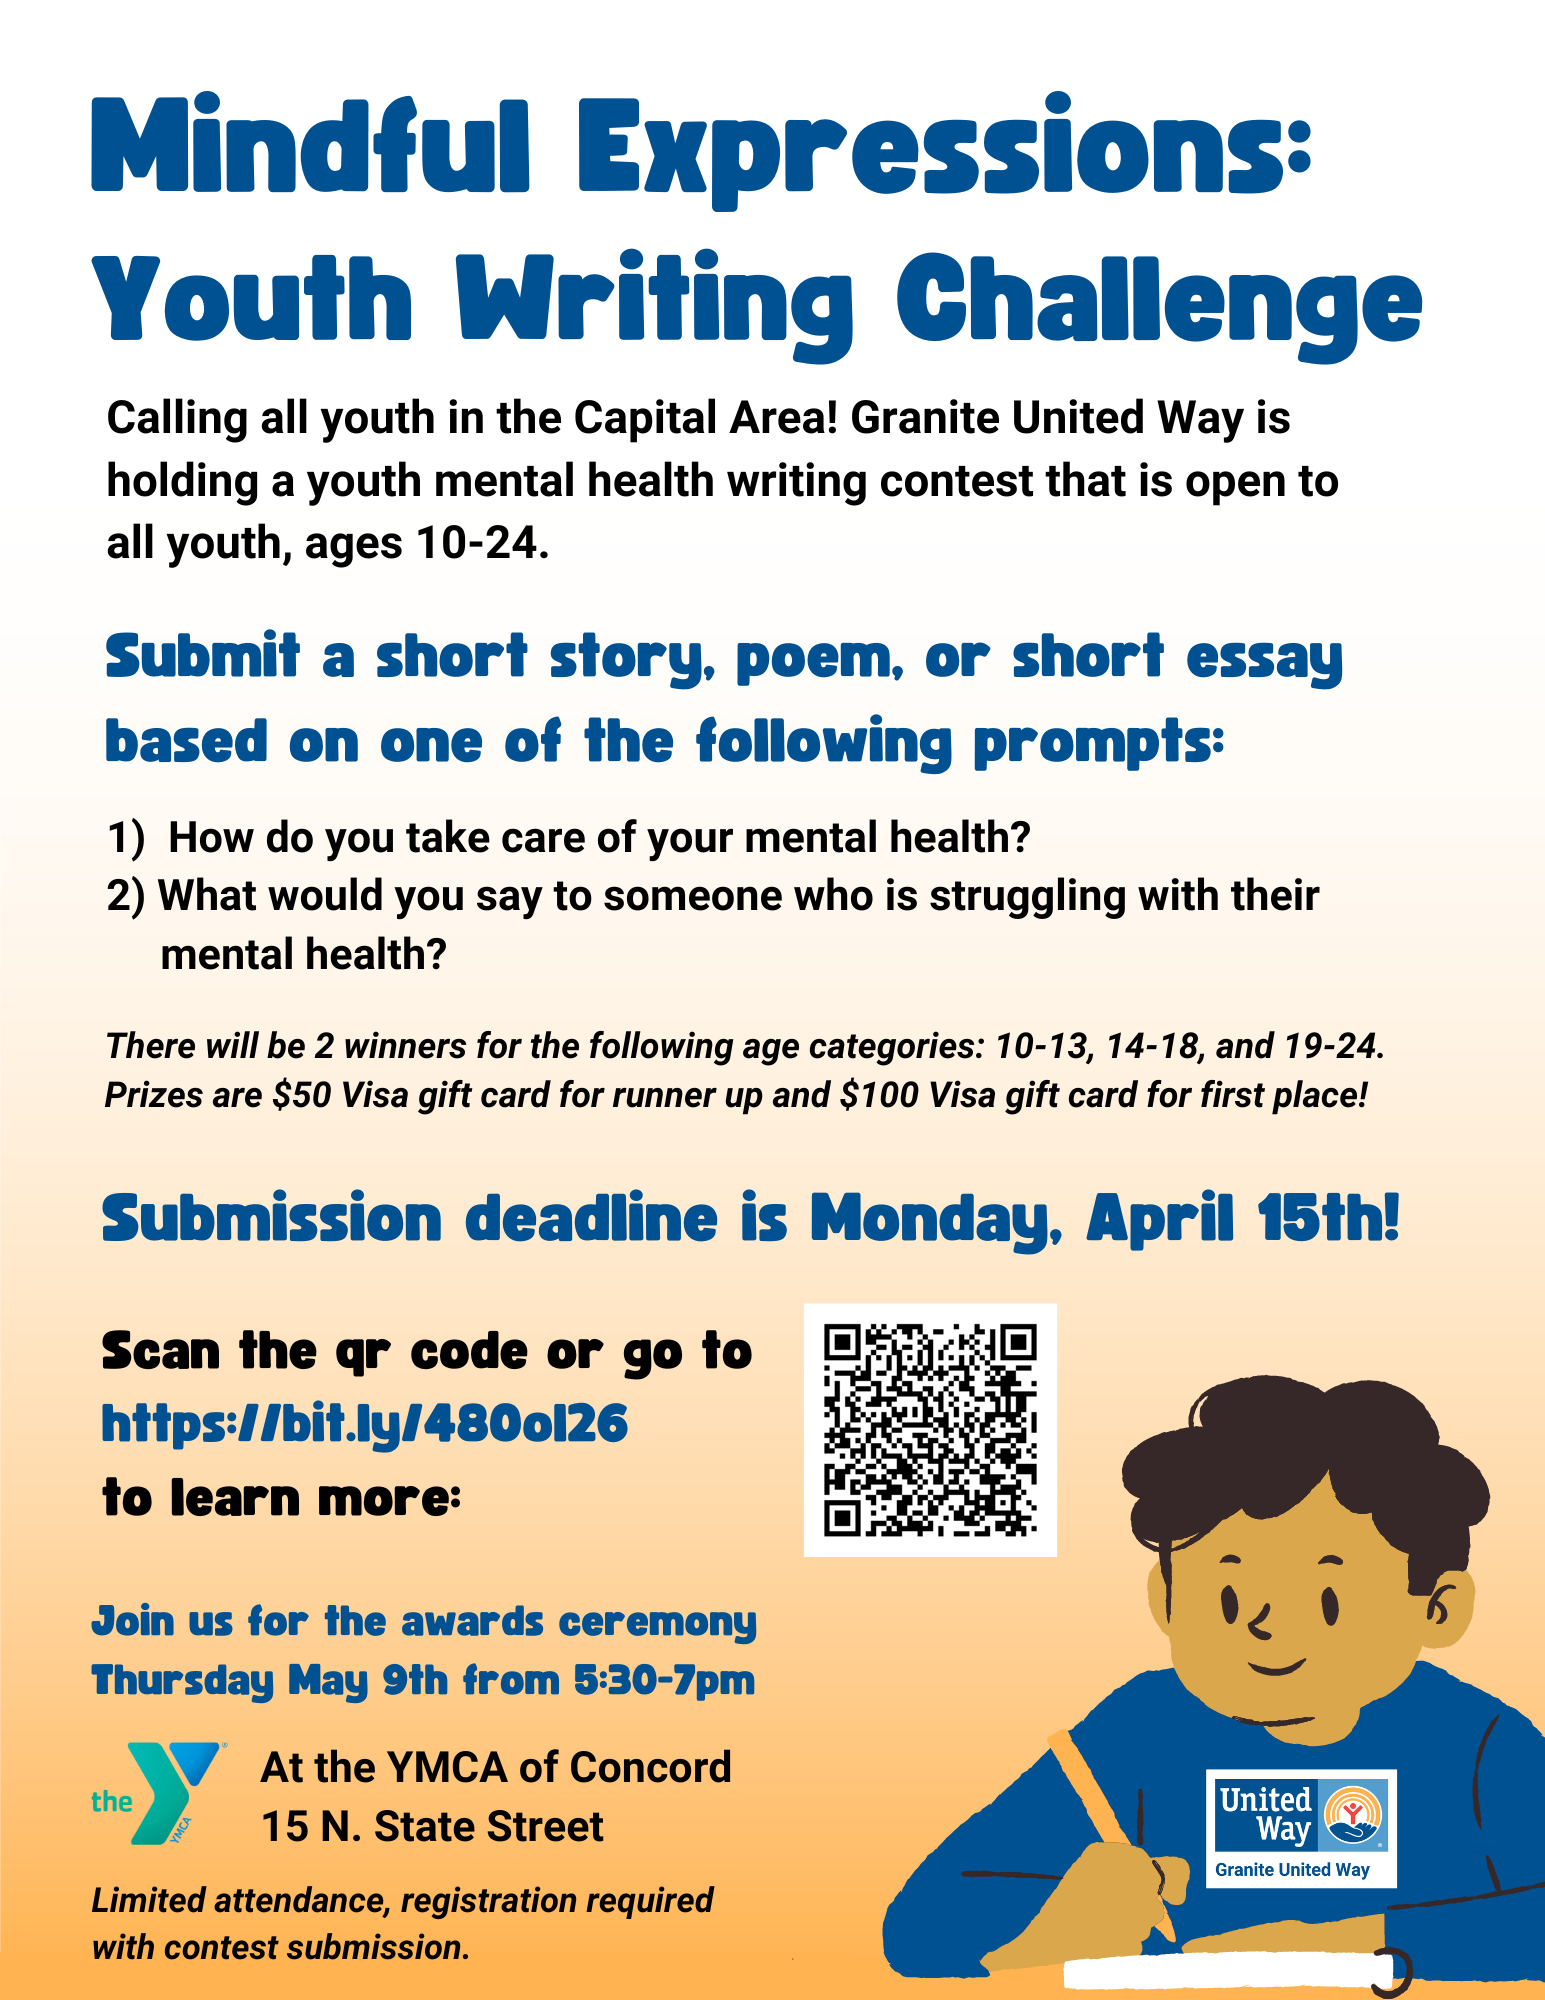 Mindful Expressions: Youth Writing Challenge